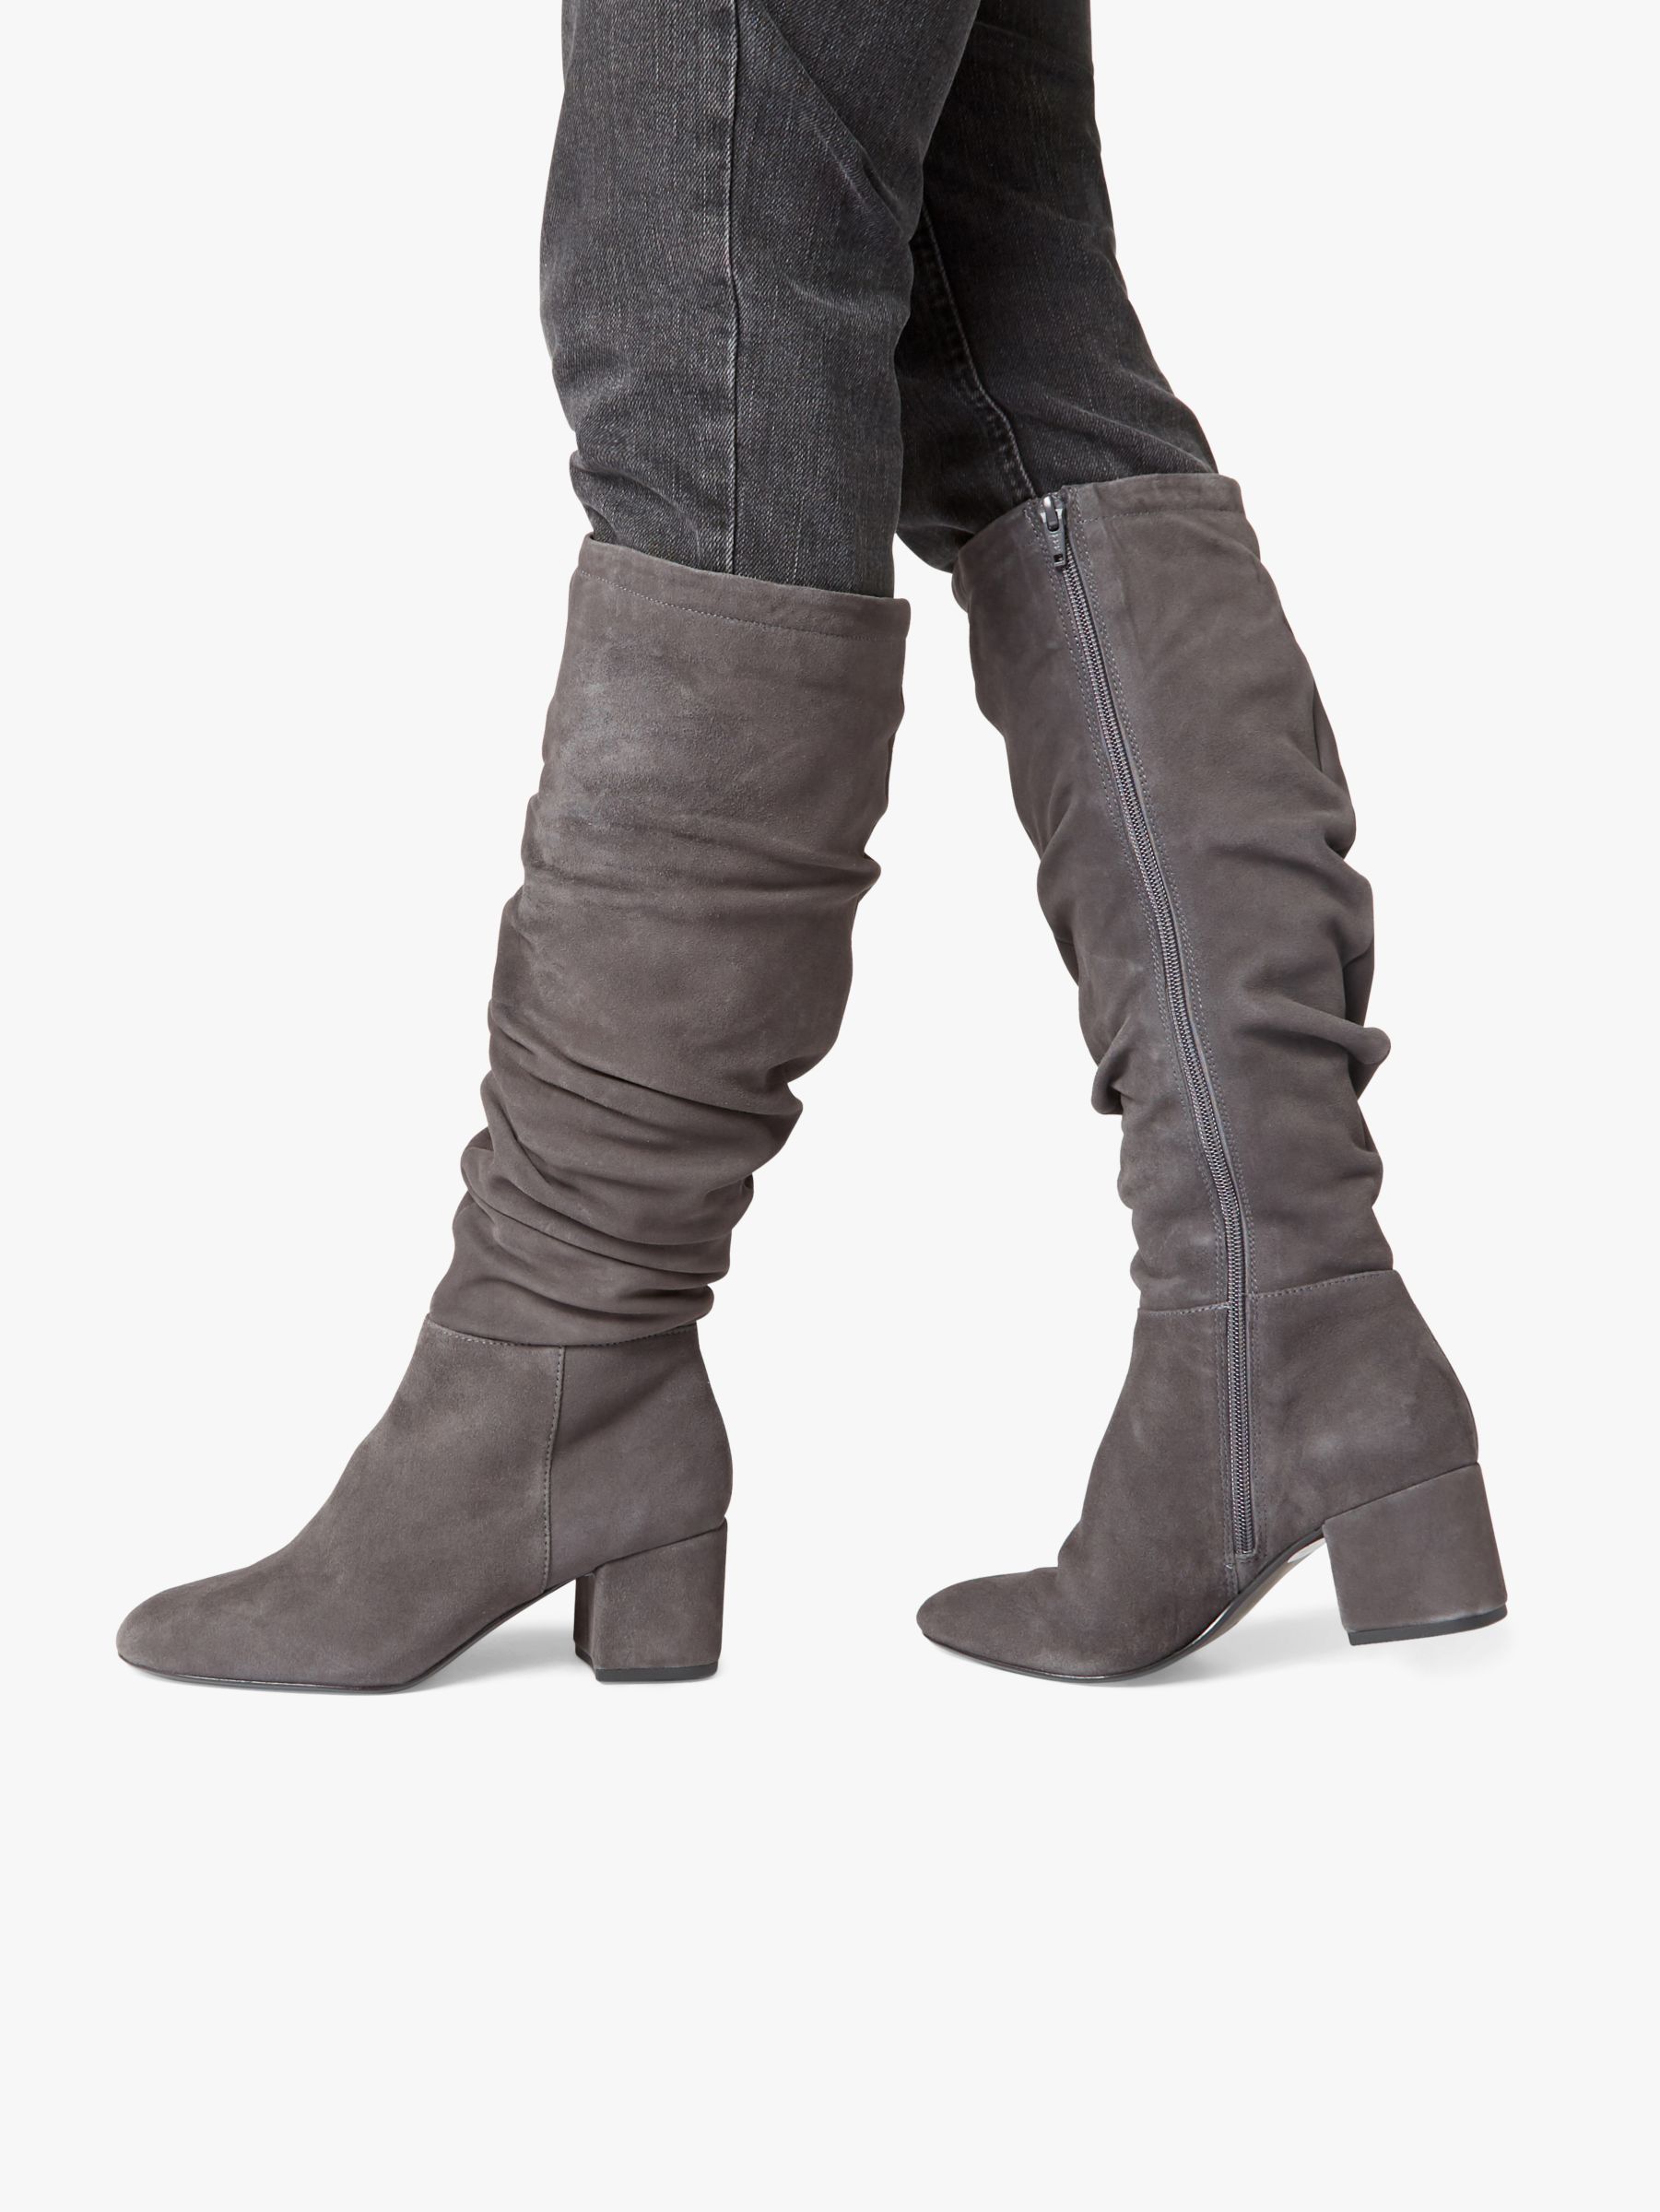 grey leather boots knee high